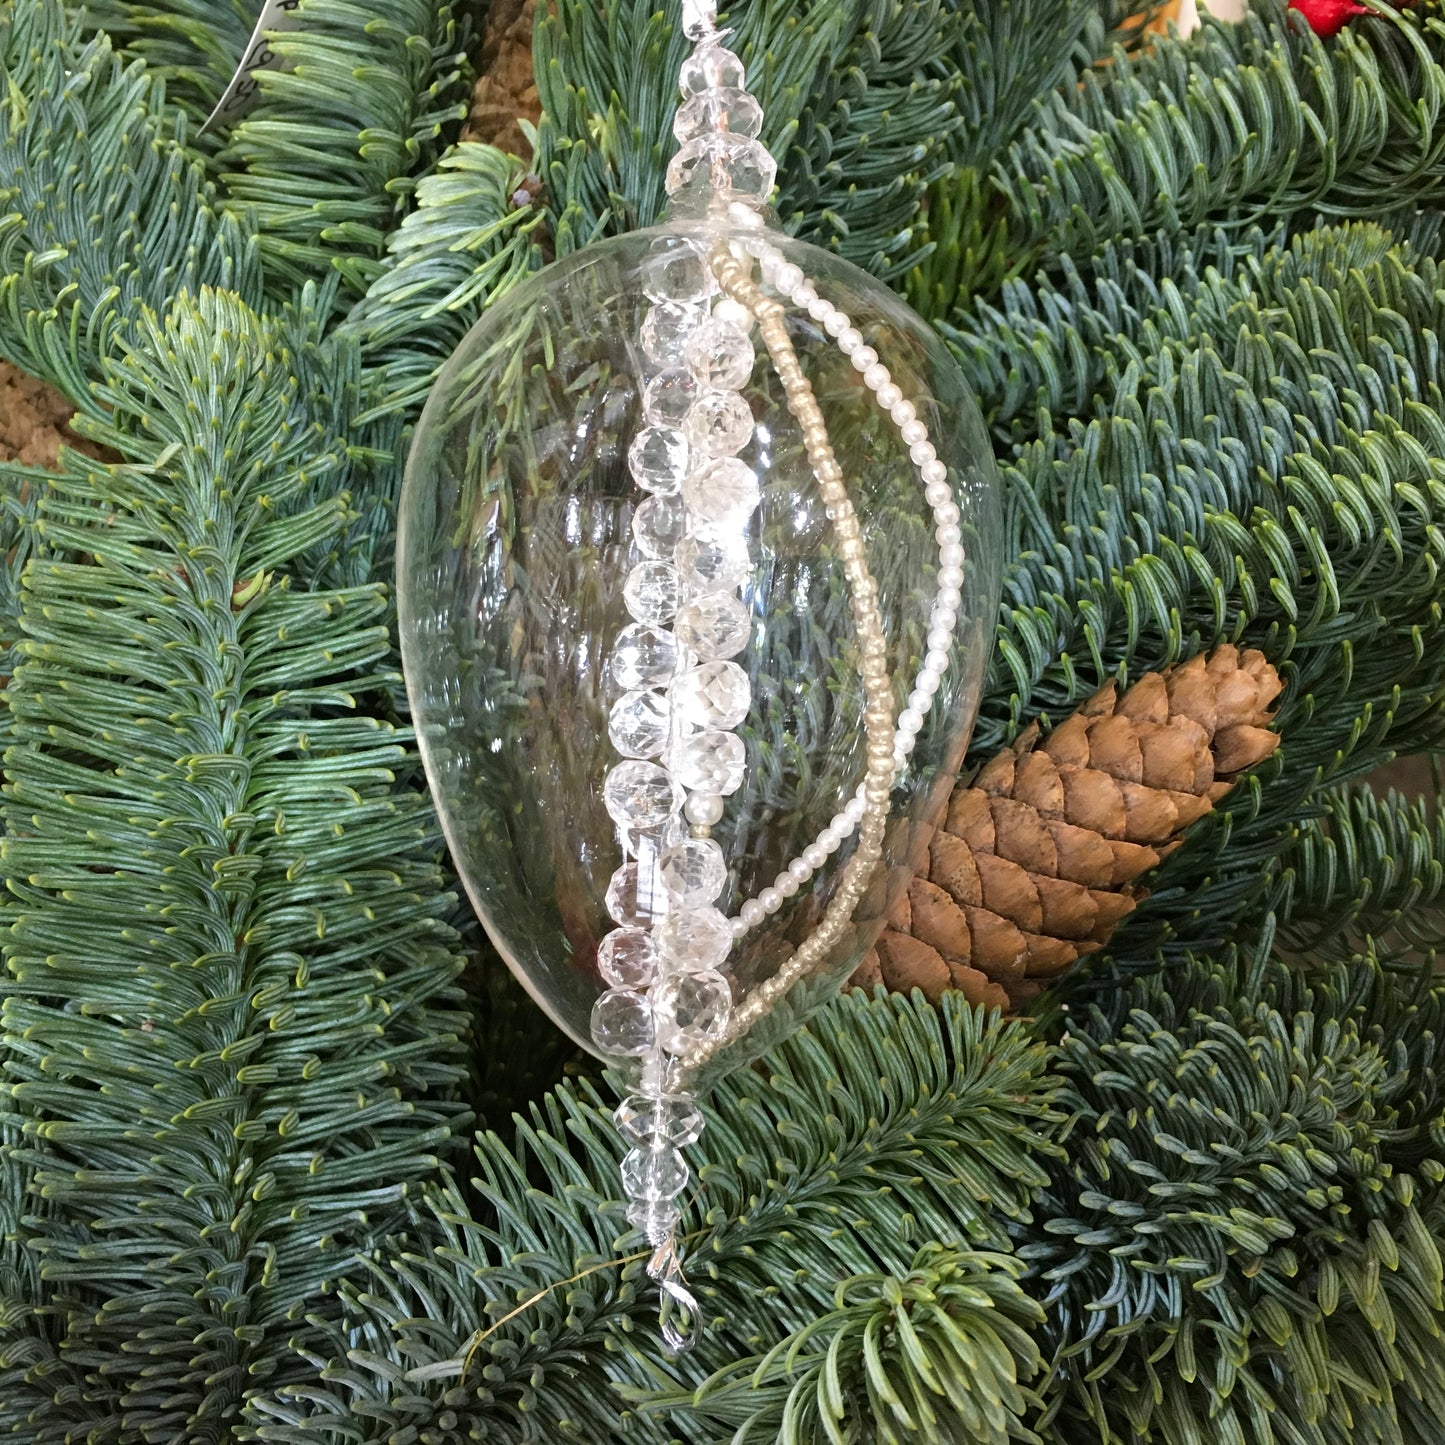 Clear egg-shaped decoration with strings of pearl, silver and glass beads that sparkle in the light